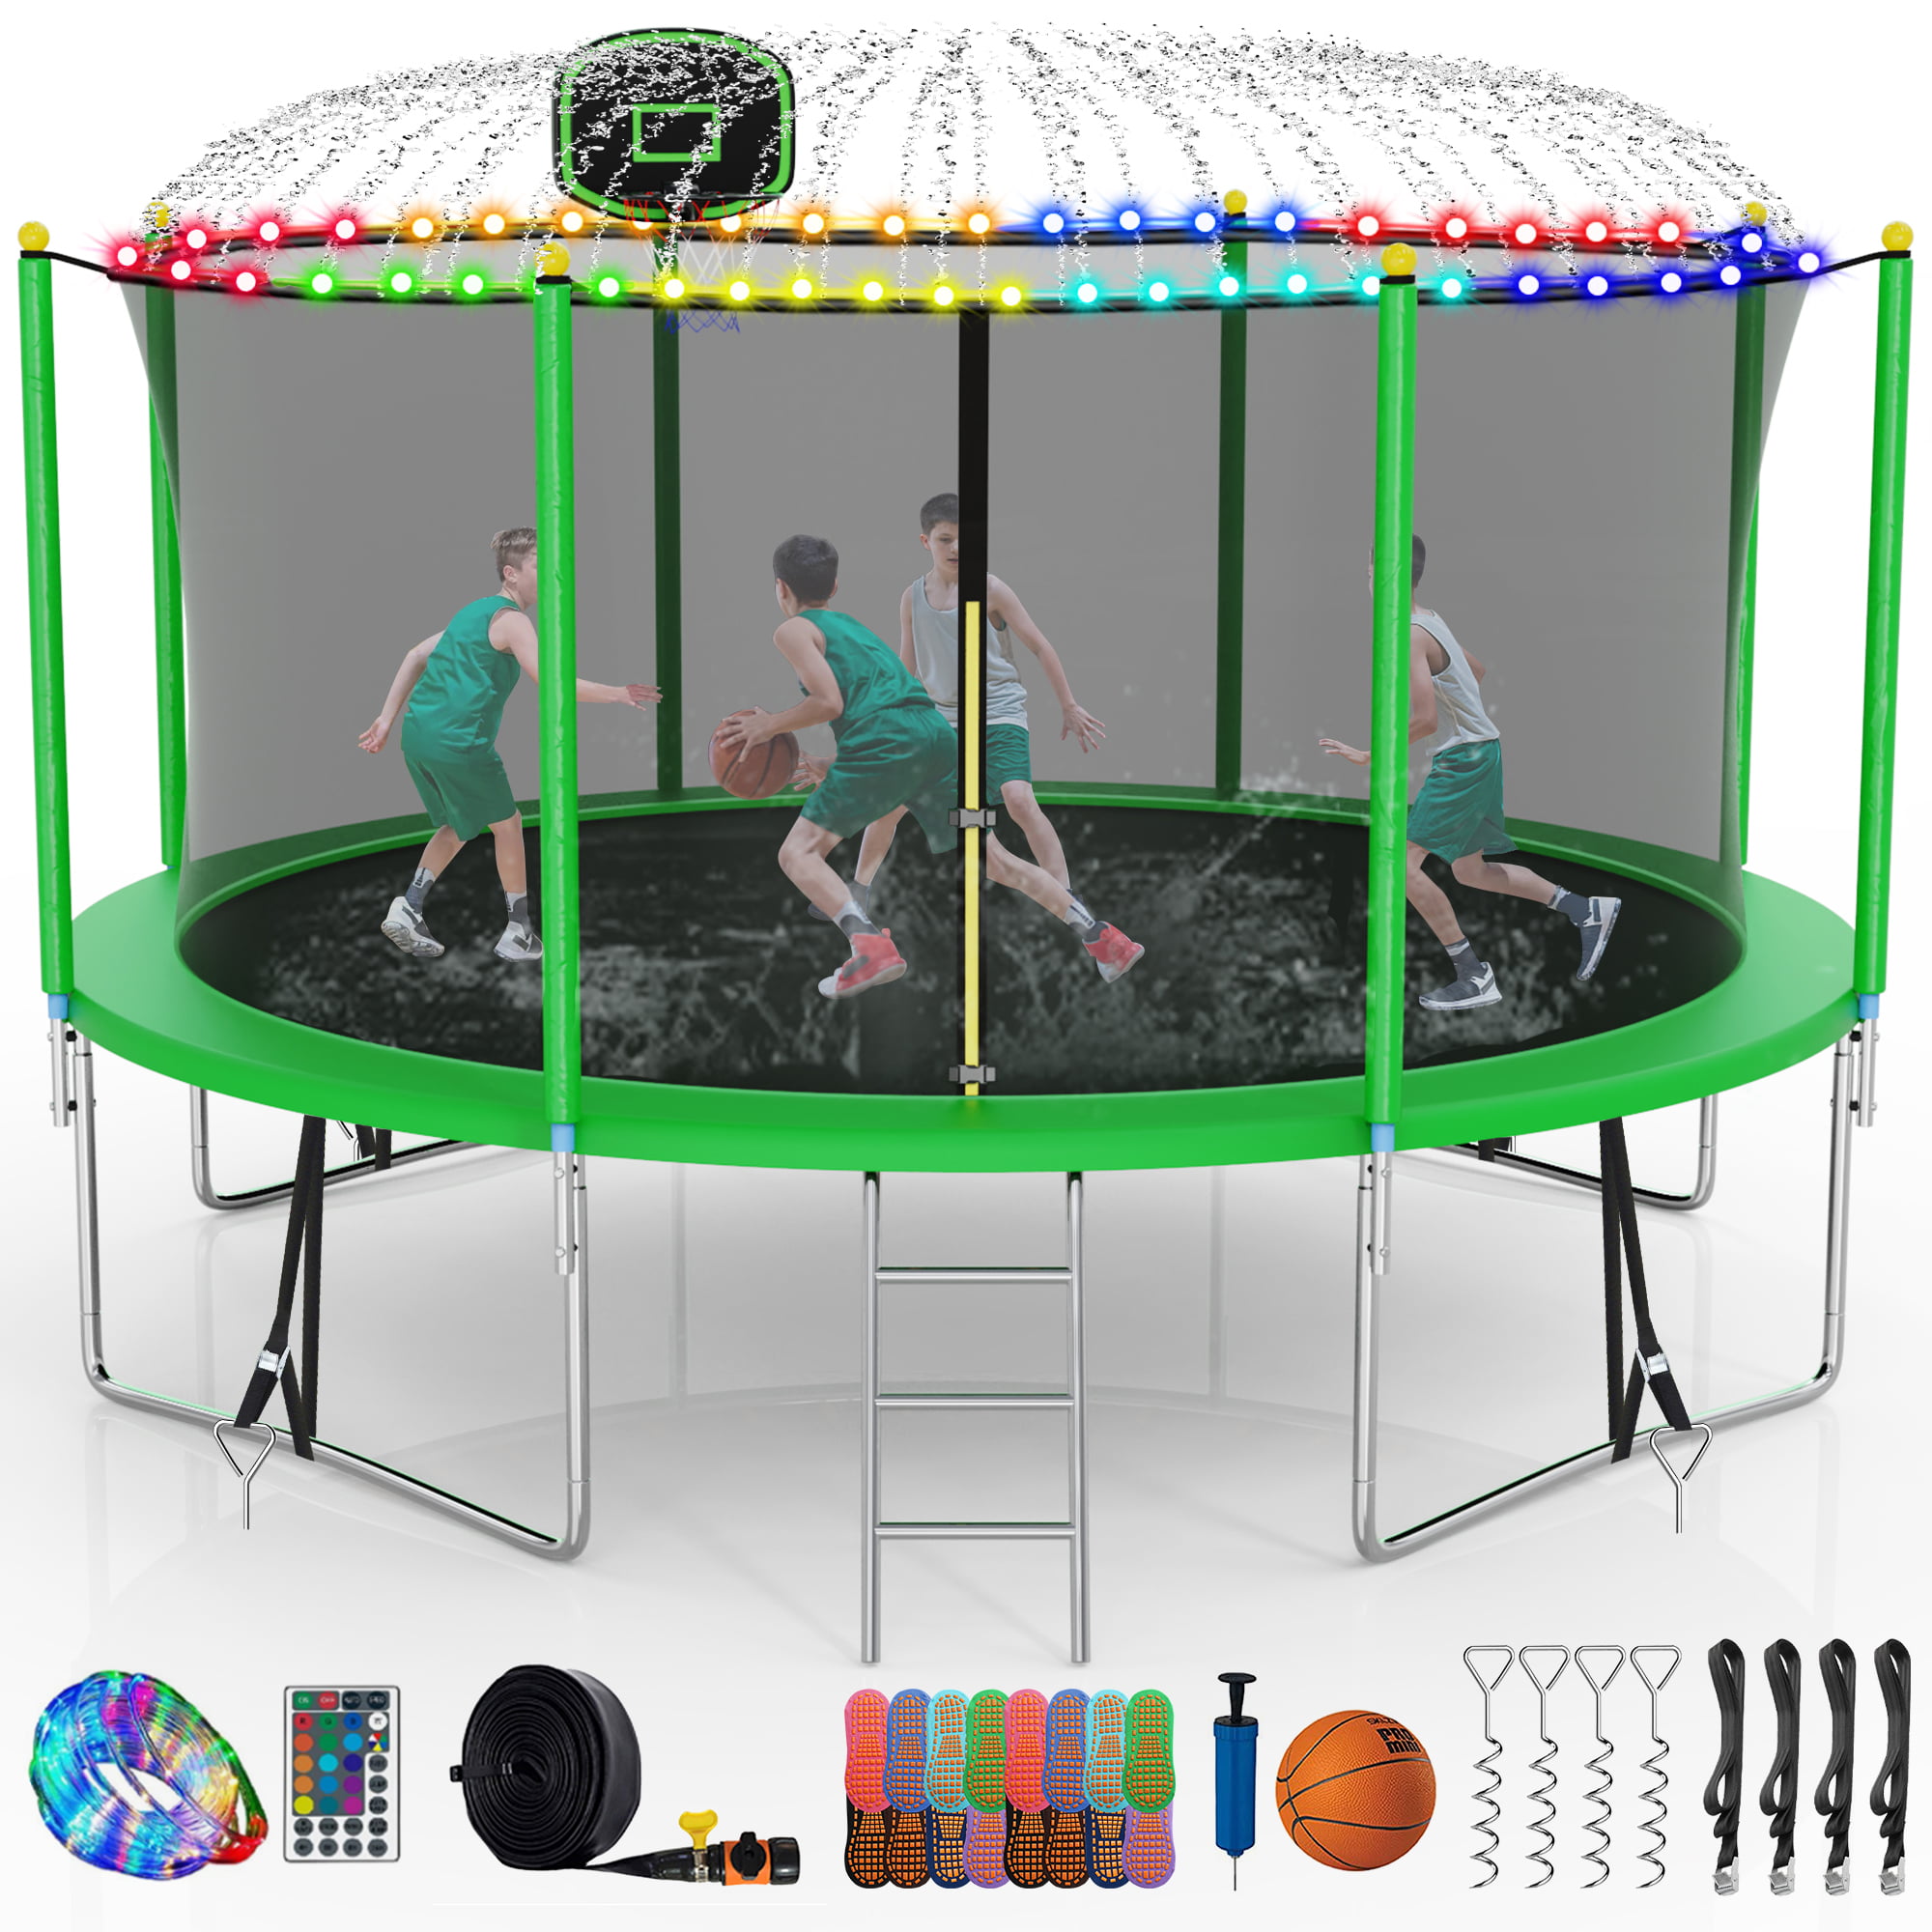 Kids Trampoline With Enclosure And Electron Shooter Game 15 Ft Green Steel Frame 